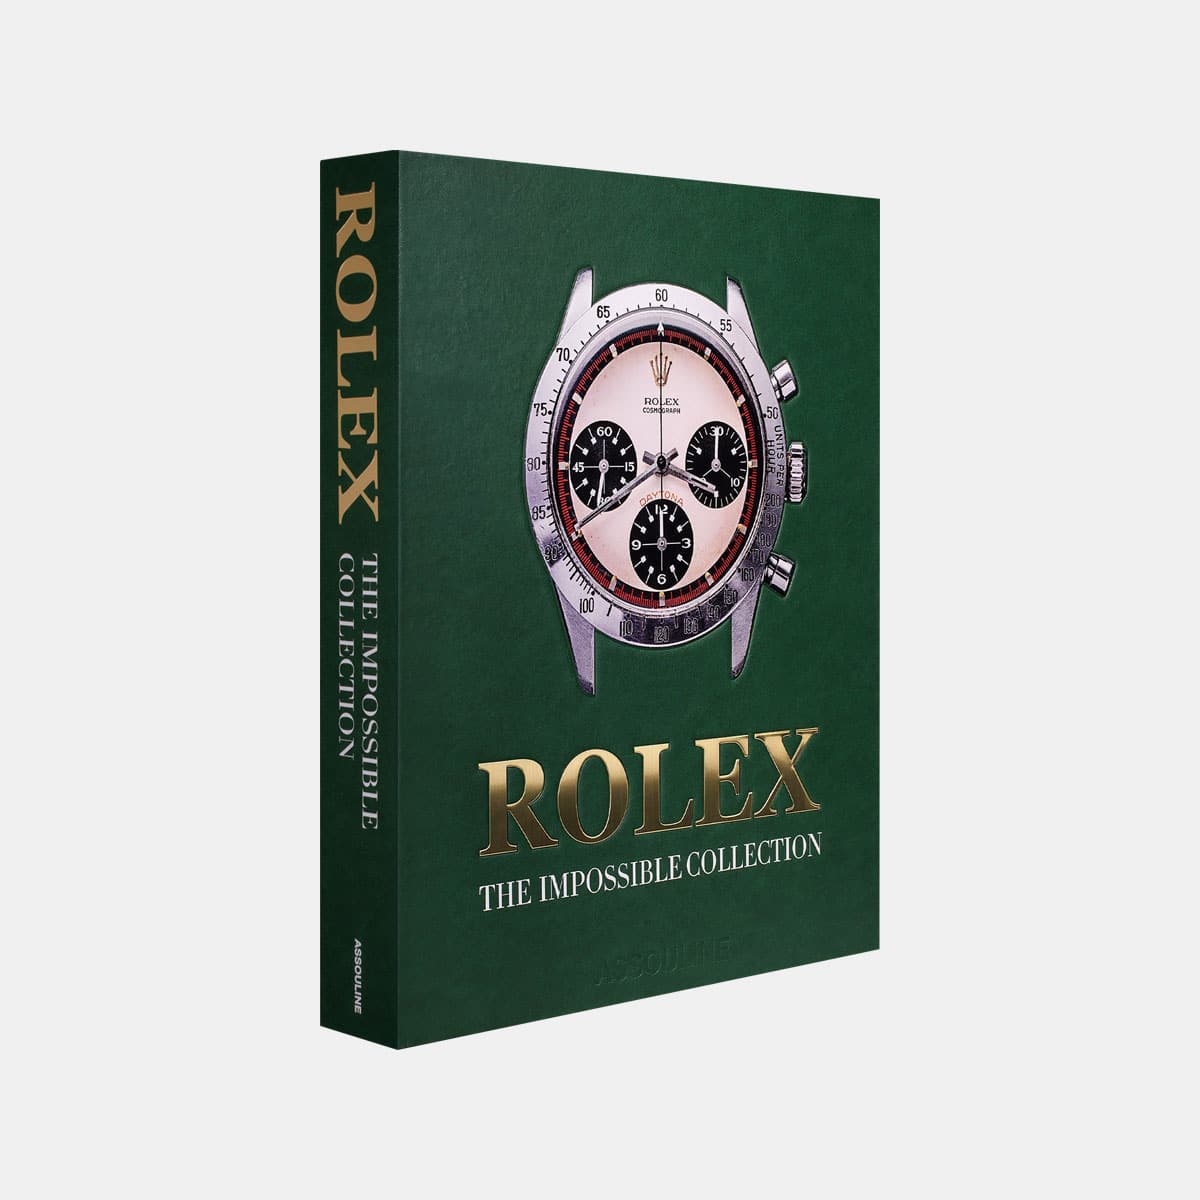 assouline-fabienne-reybaud-rolex-the-impossible-collection-001shop